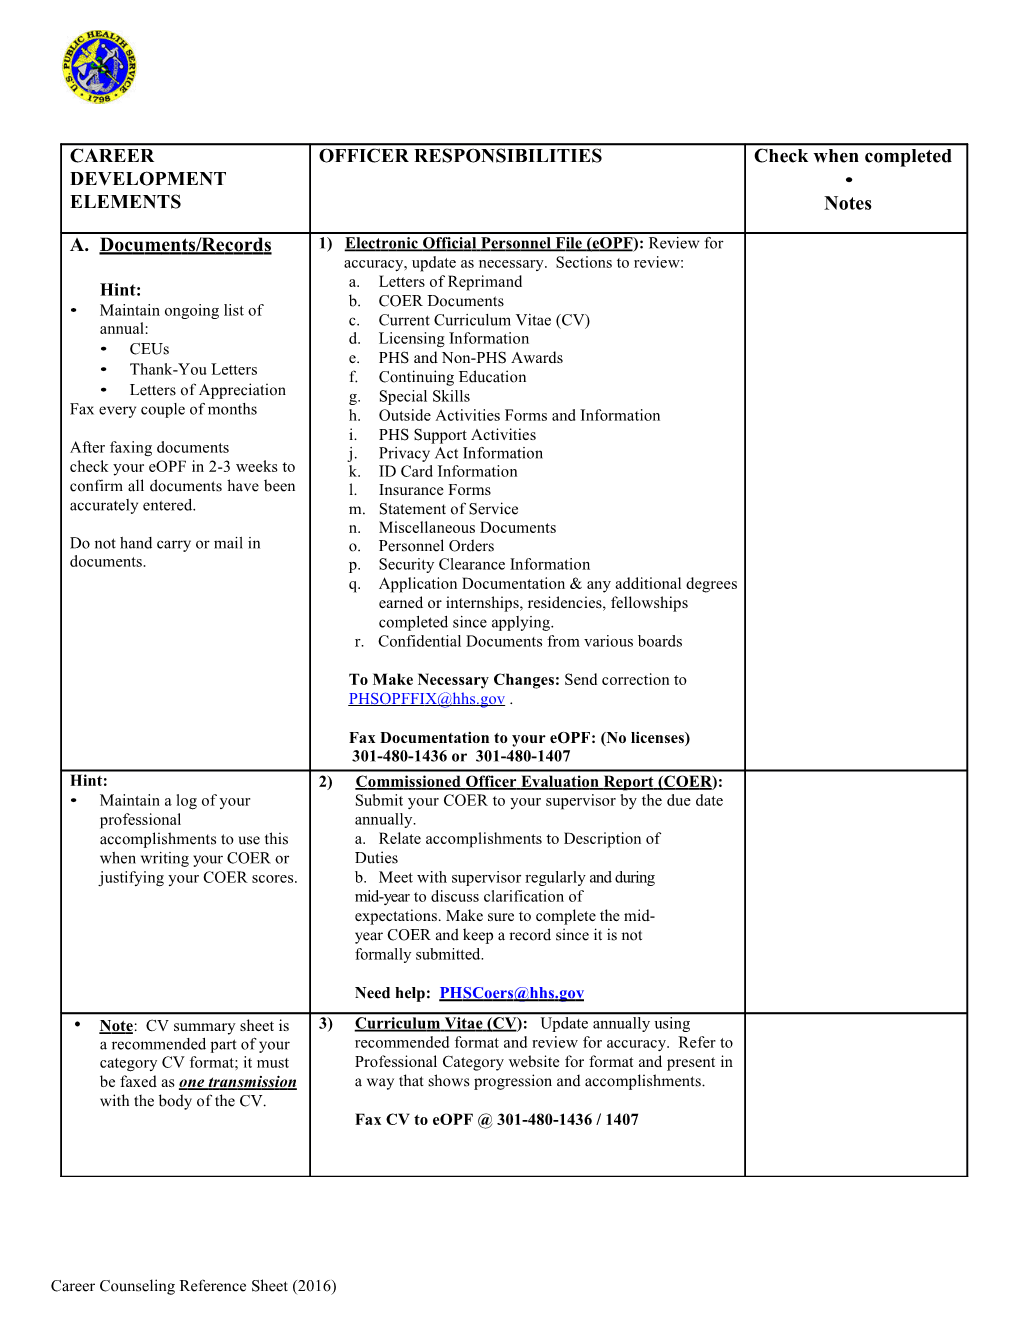 Career Counseling Reference Sheet (2016)